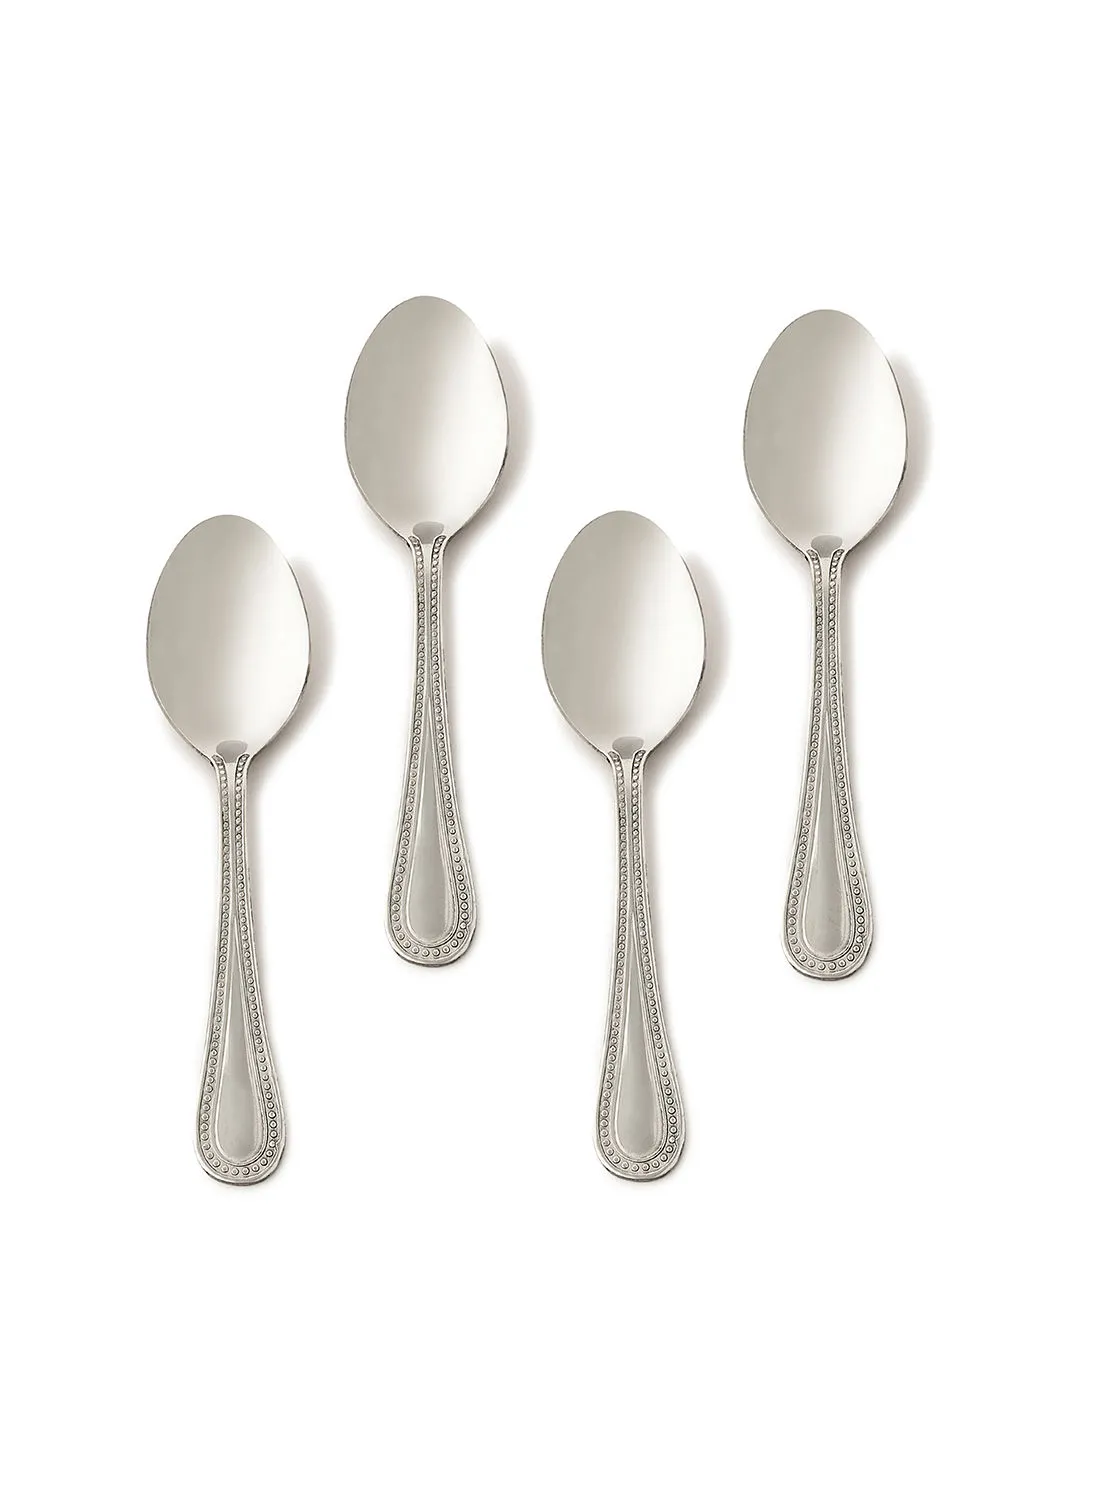 noon east 6 Piece Tablespoons Set - Made Of Stainless Steel - Silverware Flatware - Spoons - Spoon Set - Table Spoons - Serves 6 - Design Silver Spade